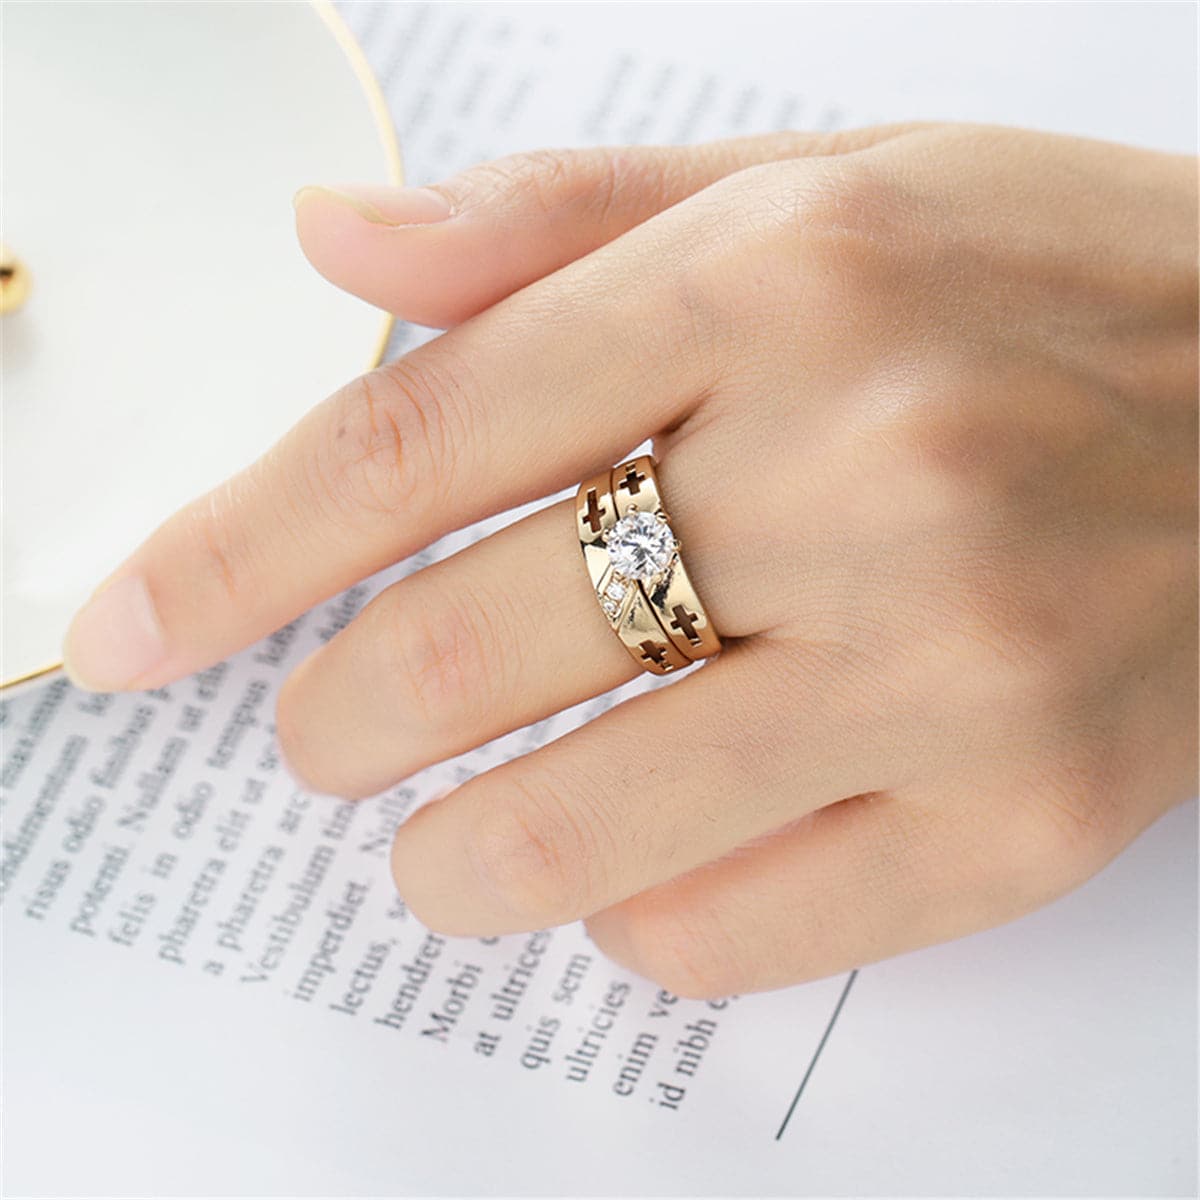 Crystal & Cubic Zirconia 18K Gold-Plated Cross Ring Set